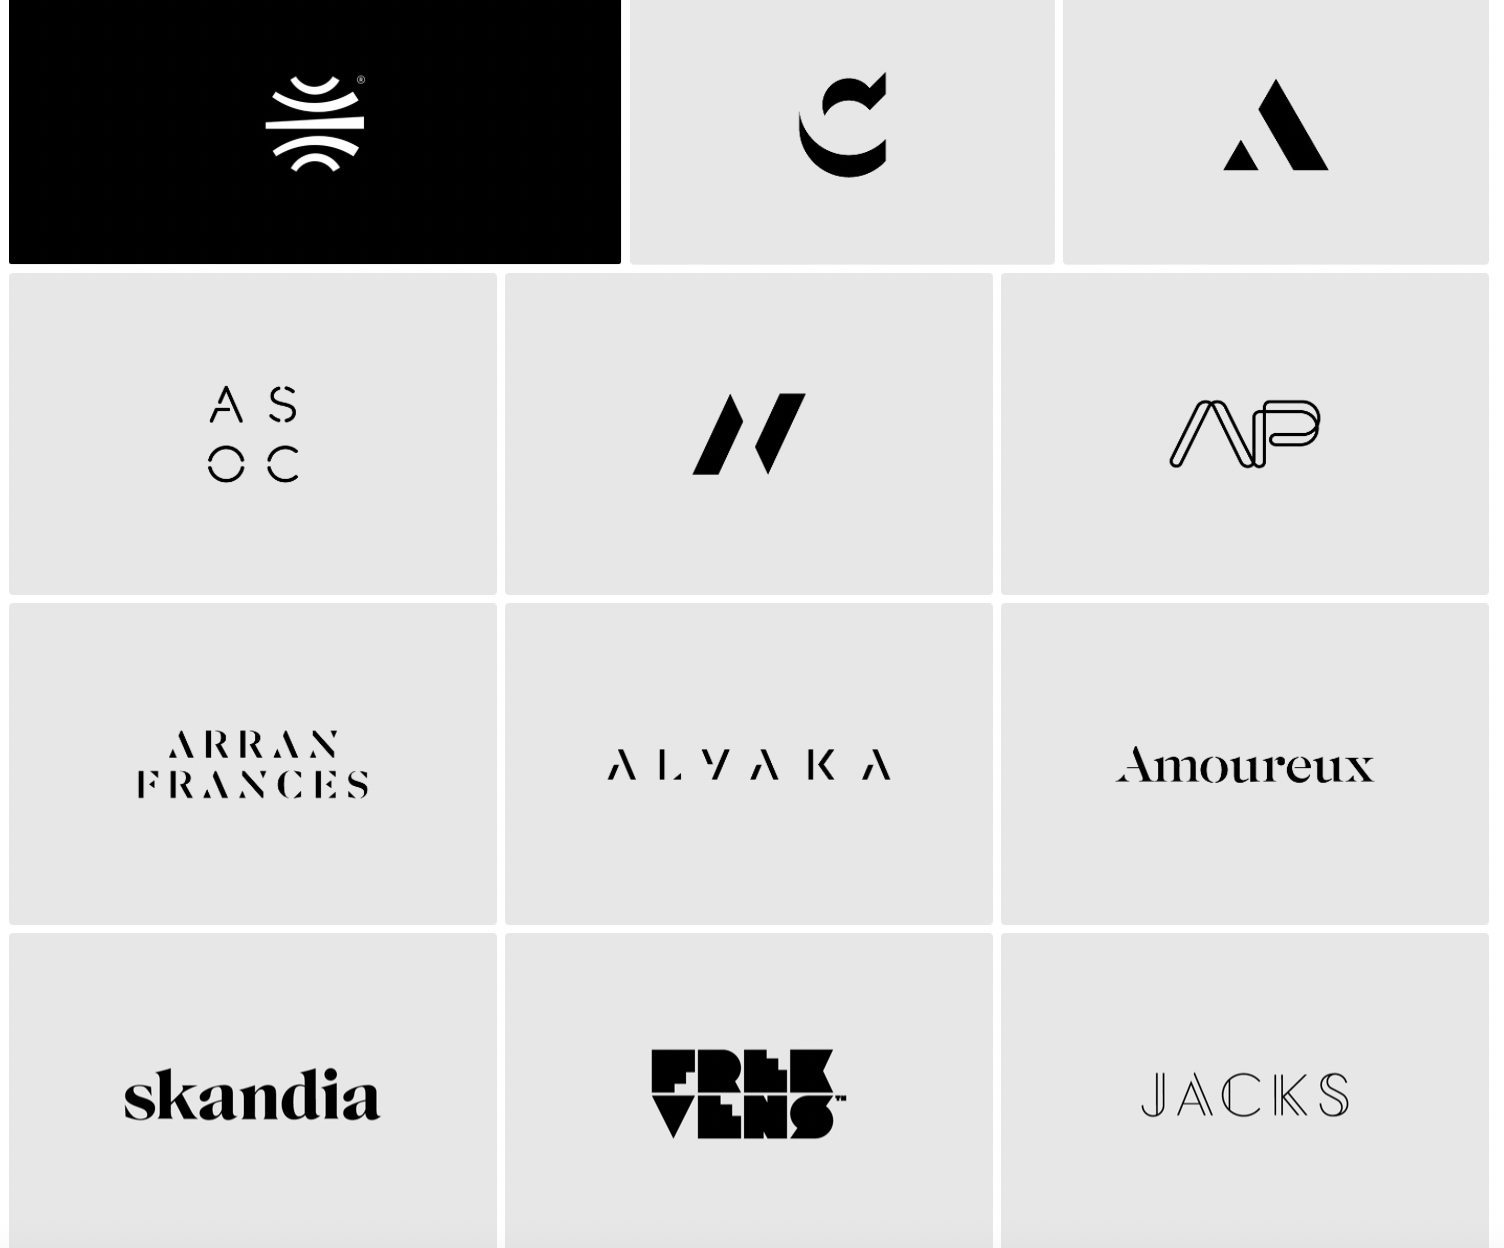 Mood board example with monochrome logos